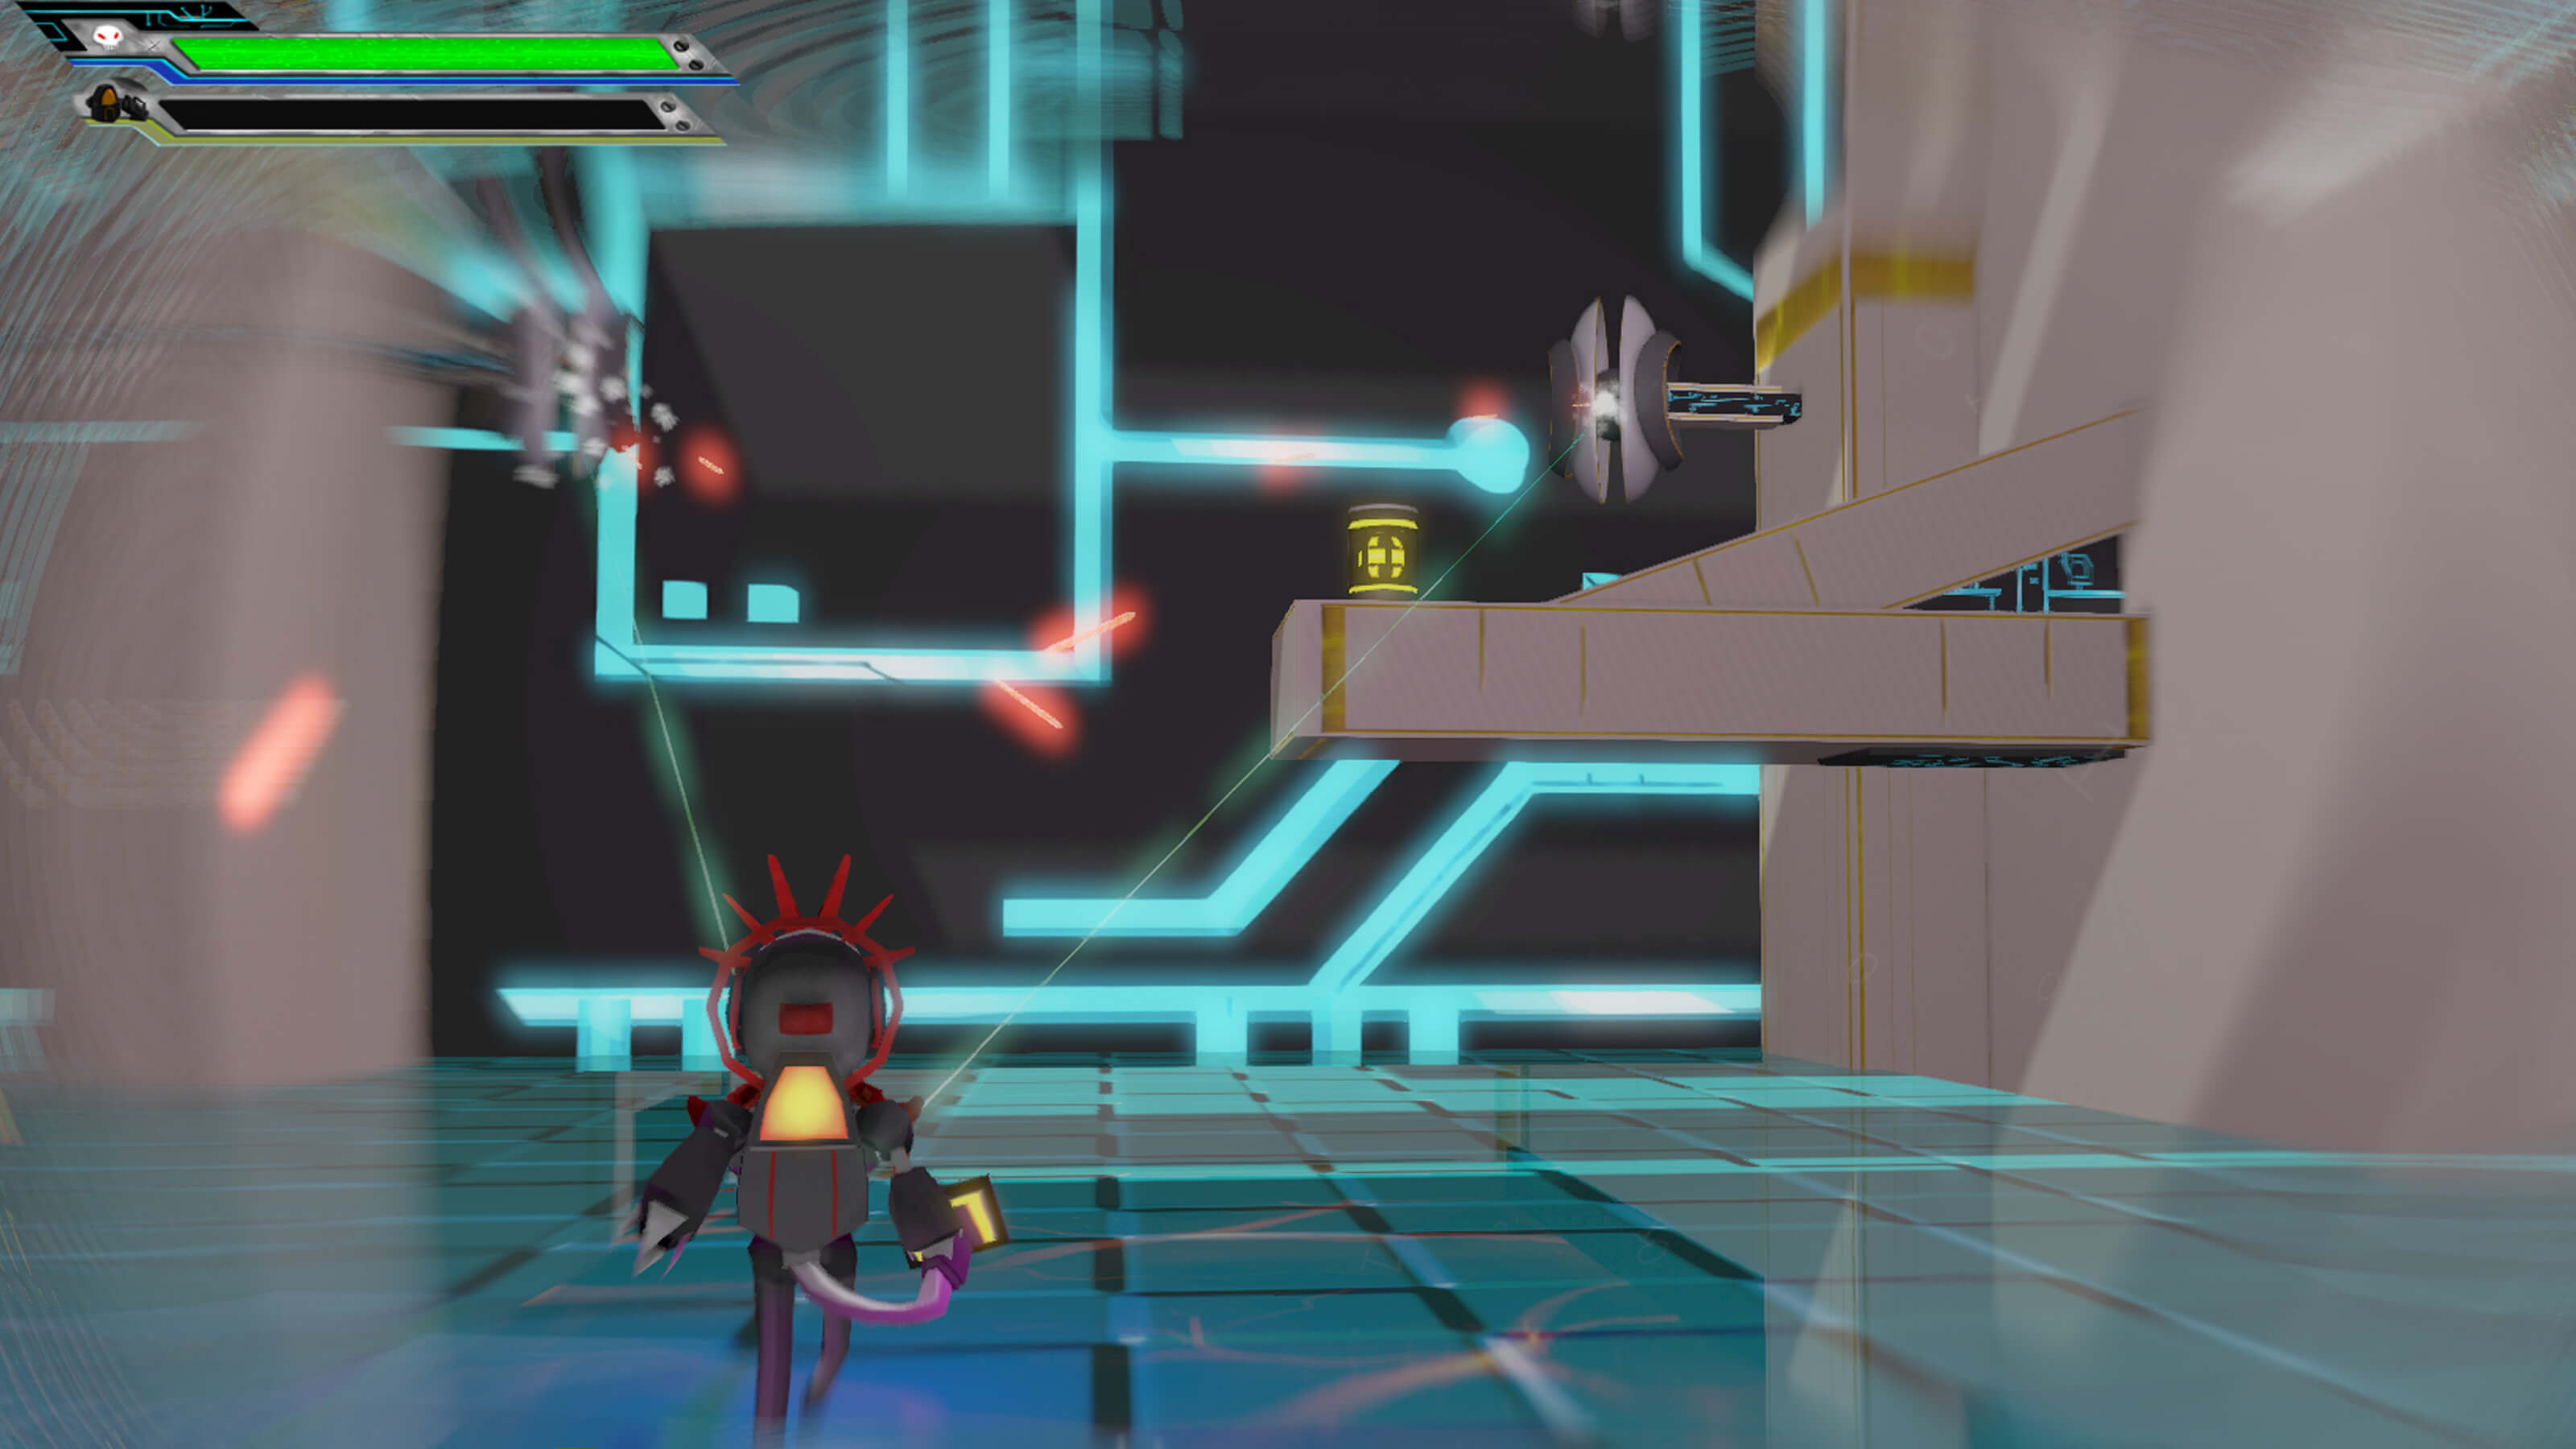 The player's character aims at an enemy up and to the right as lasers fly through the air